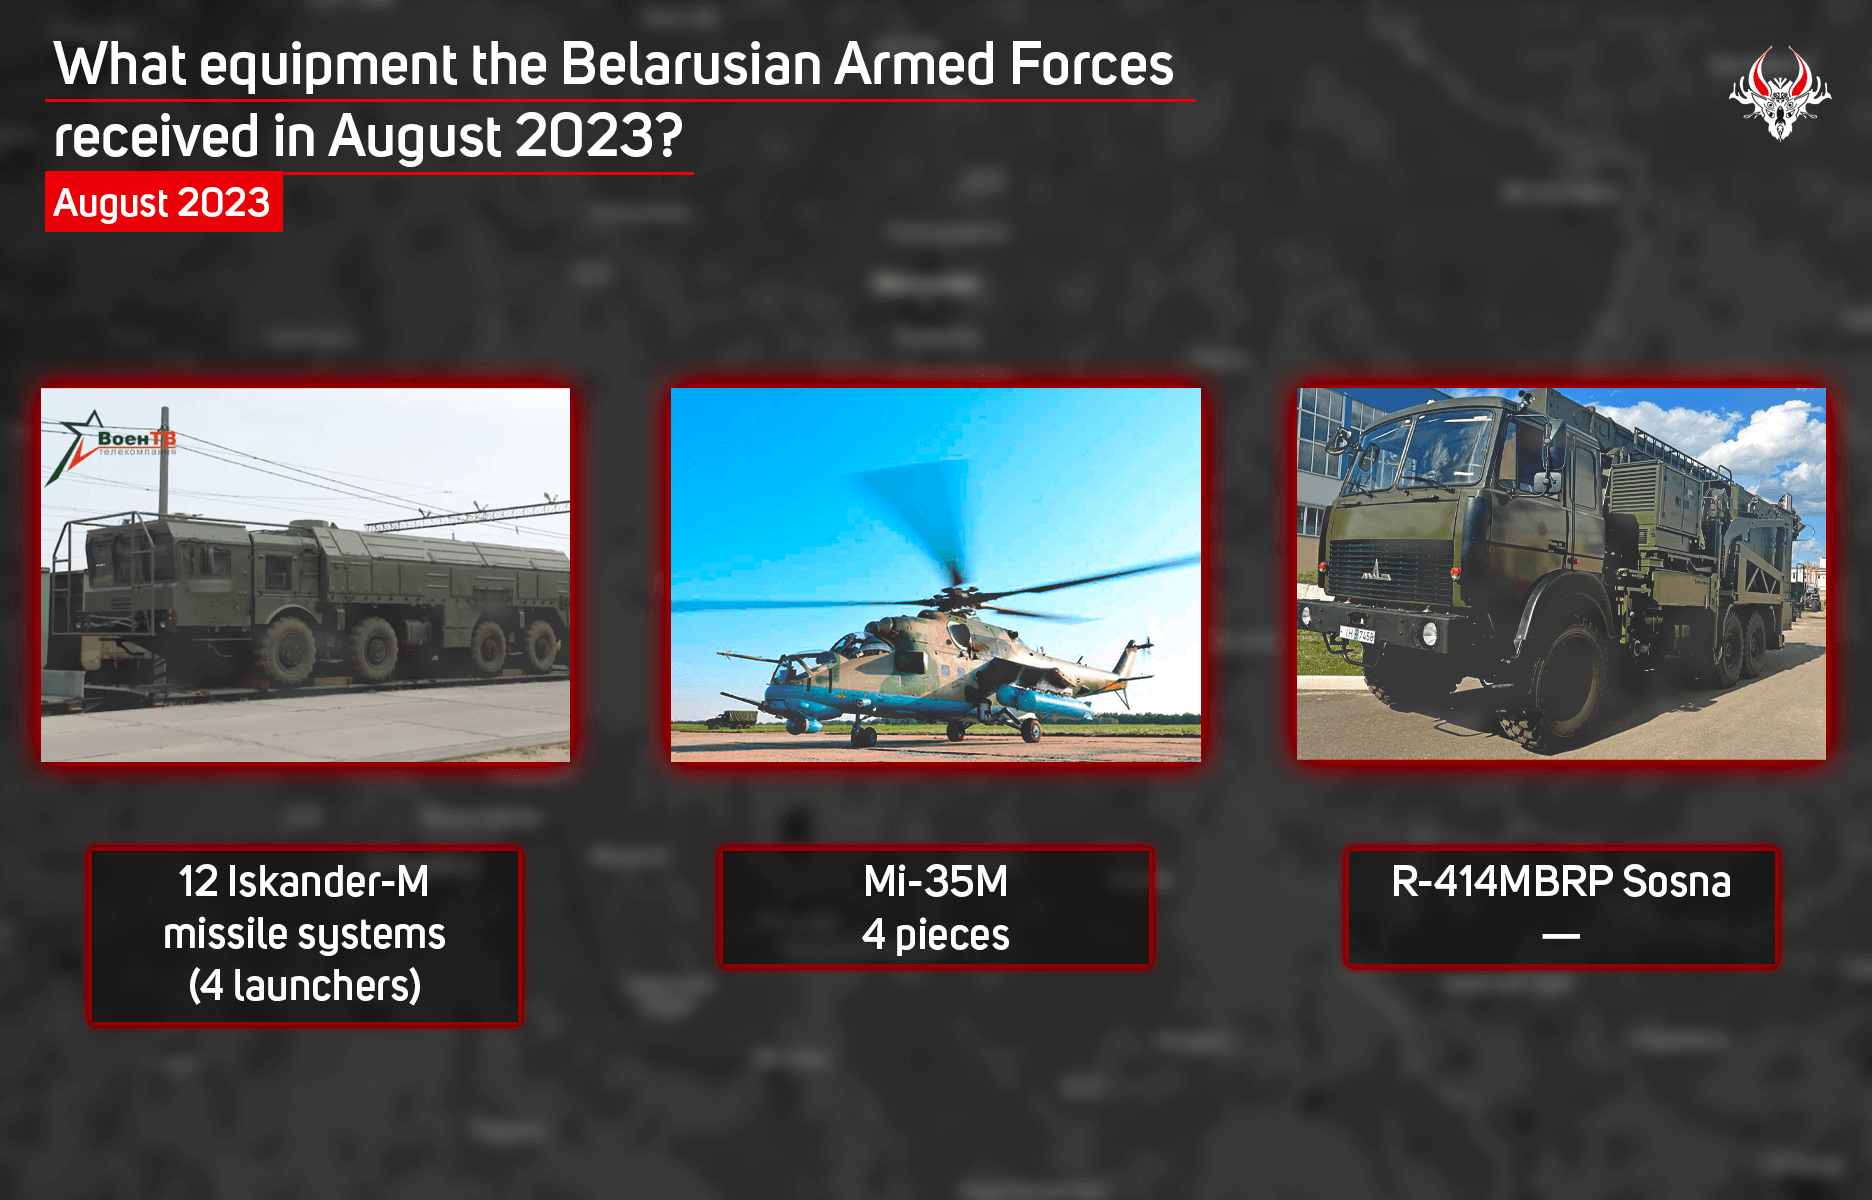 The Belarusian Armed Forces received 3 types of new military equipment in August